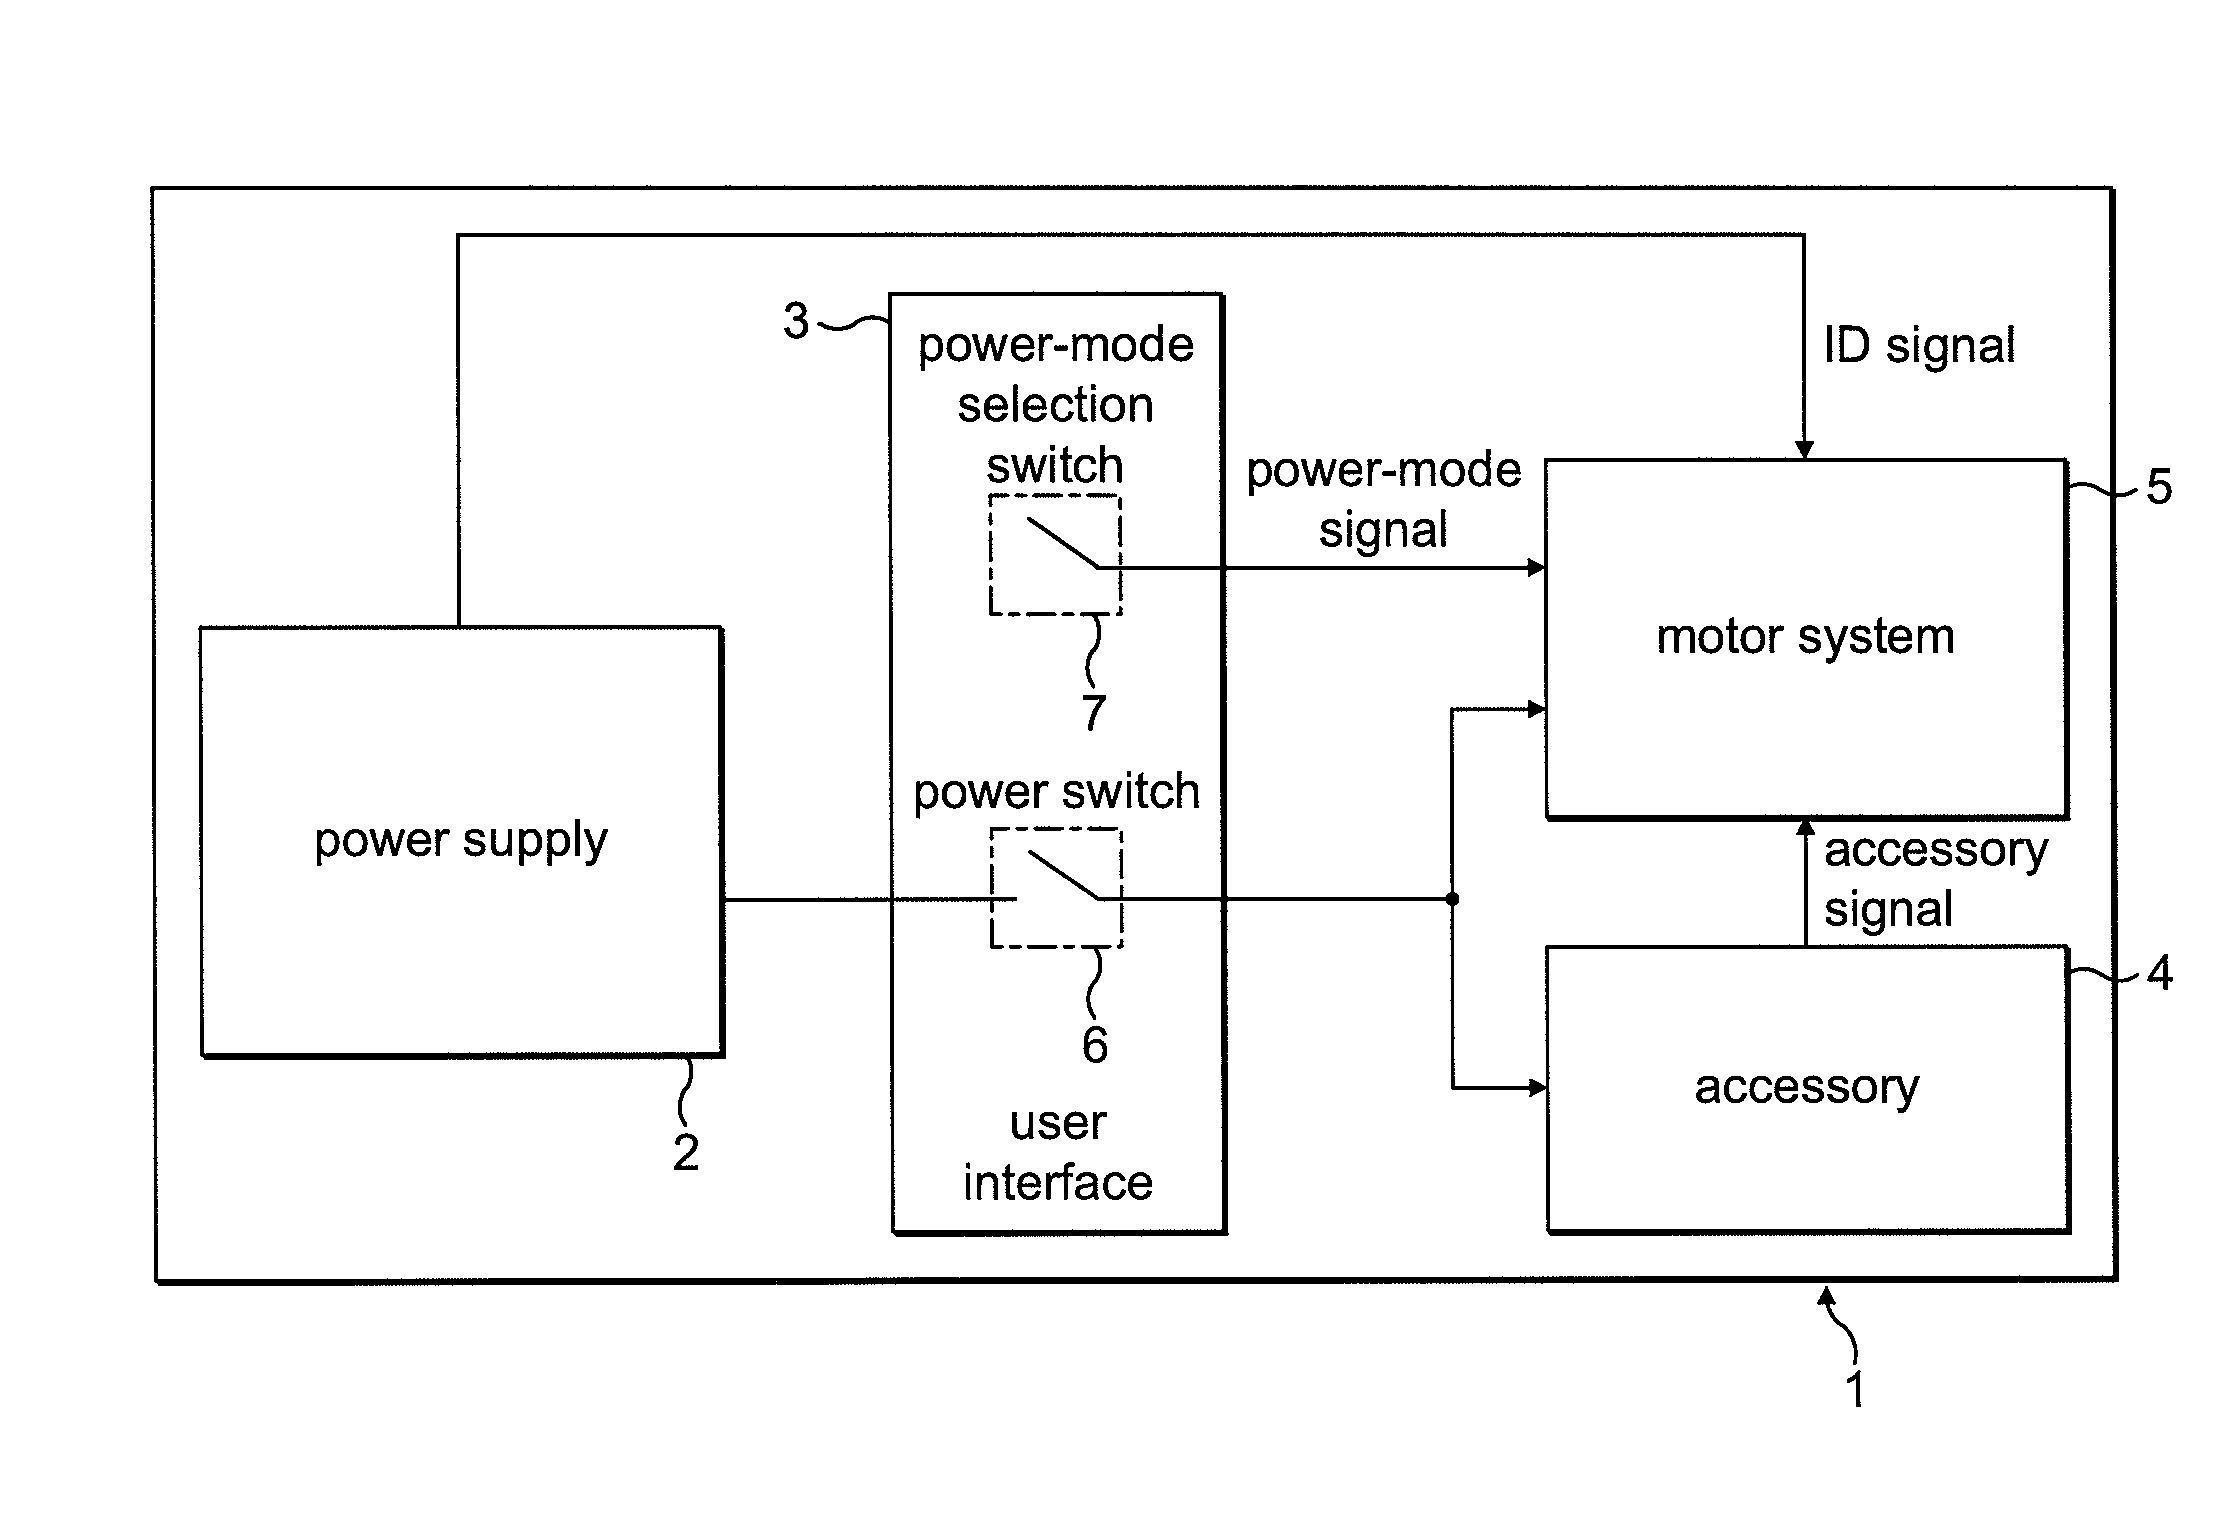 Constant-power electric system